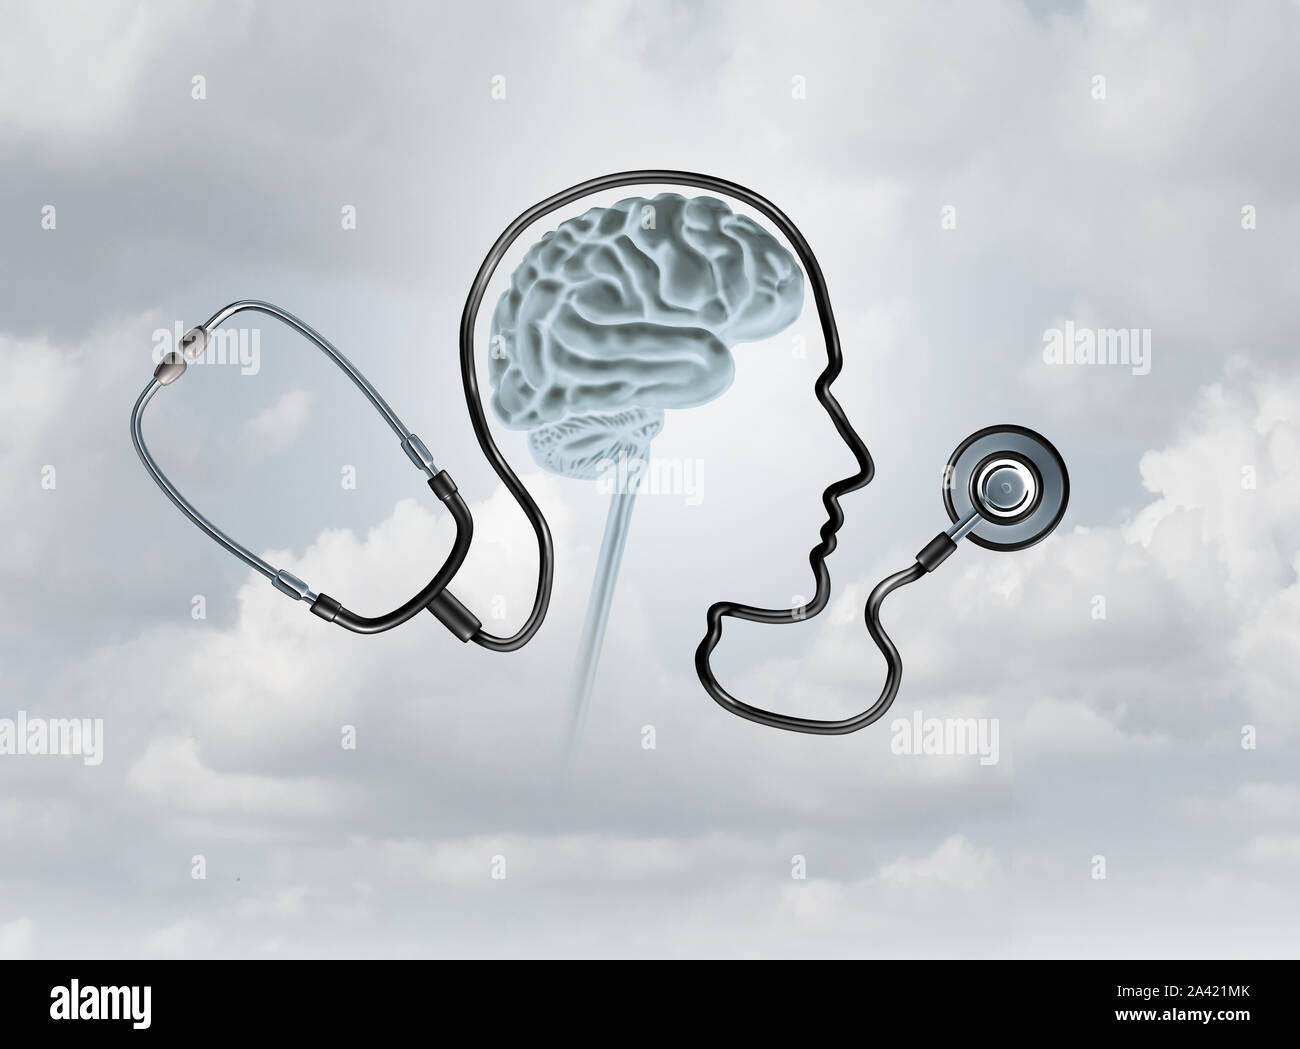 Mental health concept and brain disorder awareness as a healthcare or health care concept with 3D illustration elements. Stock Photo